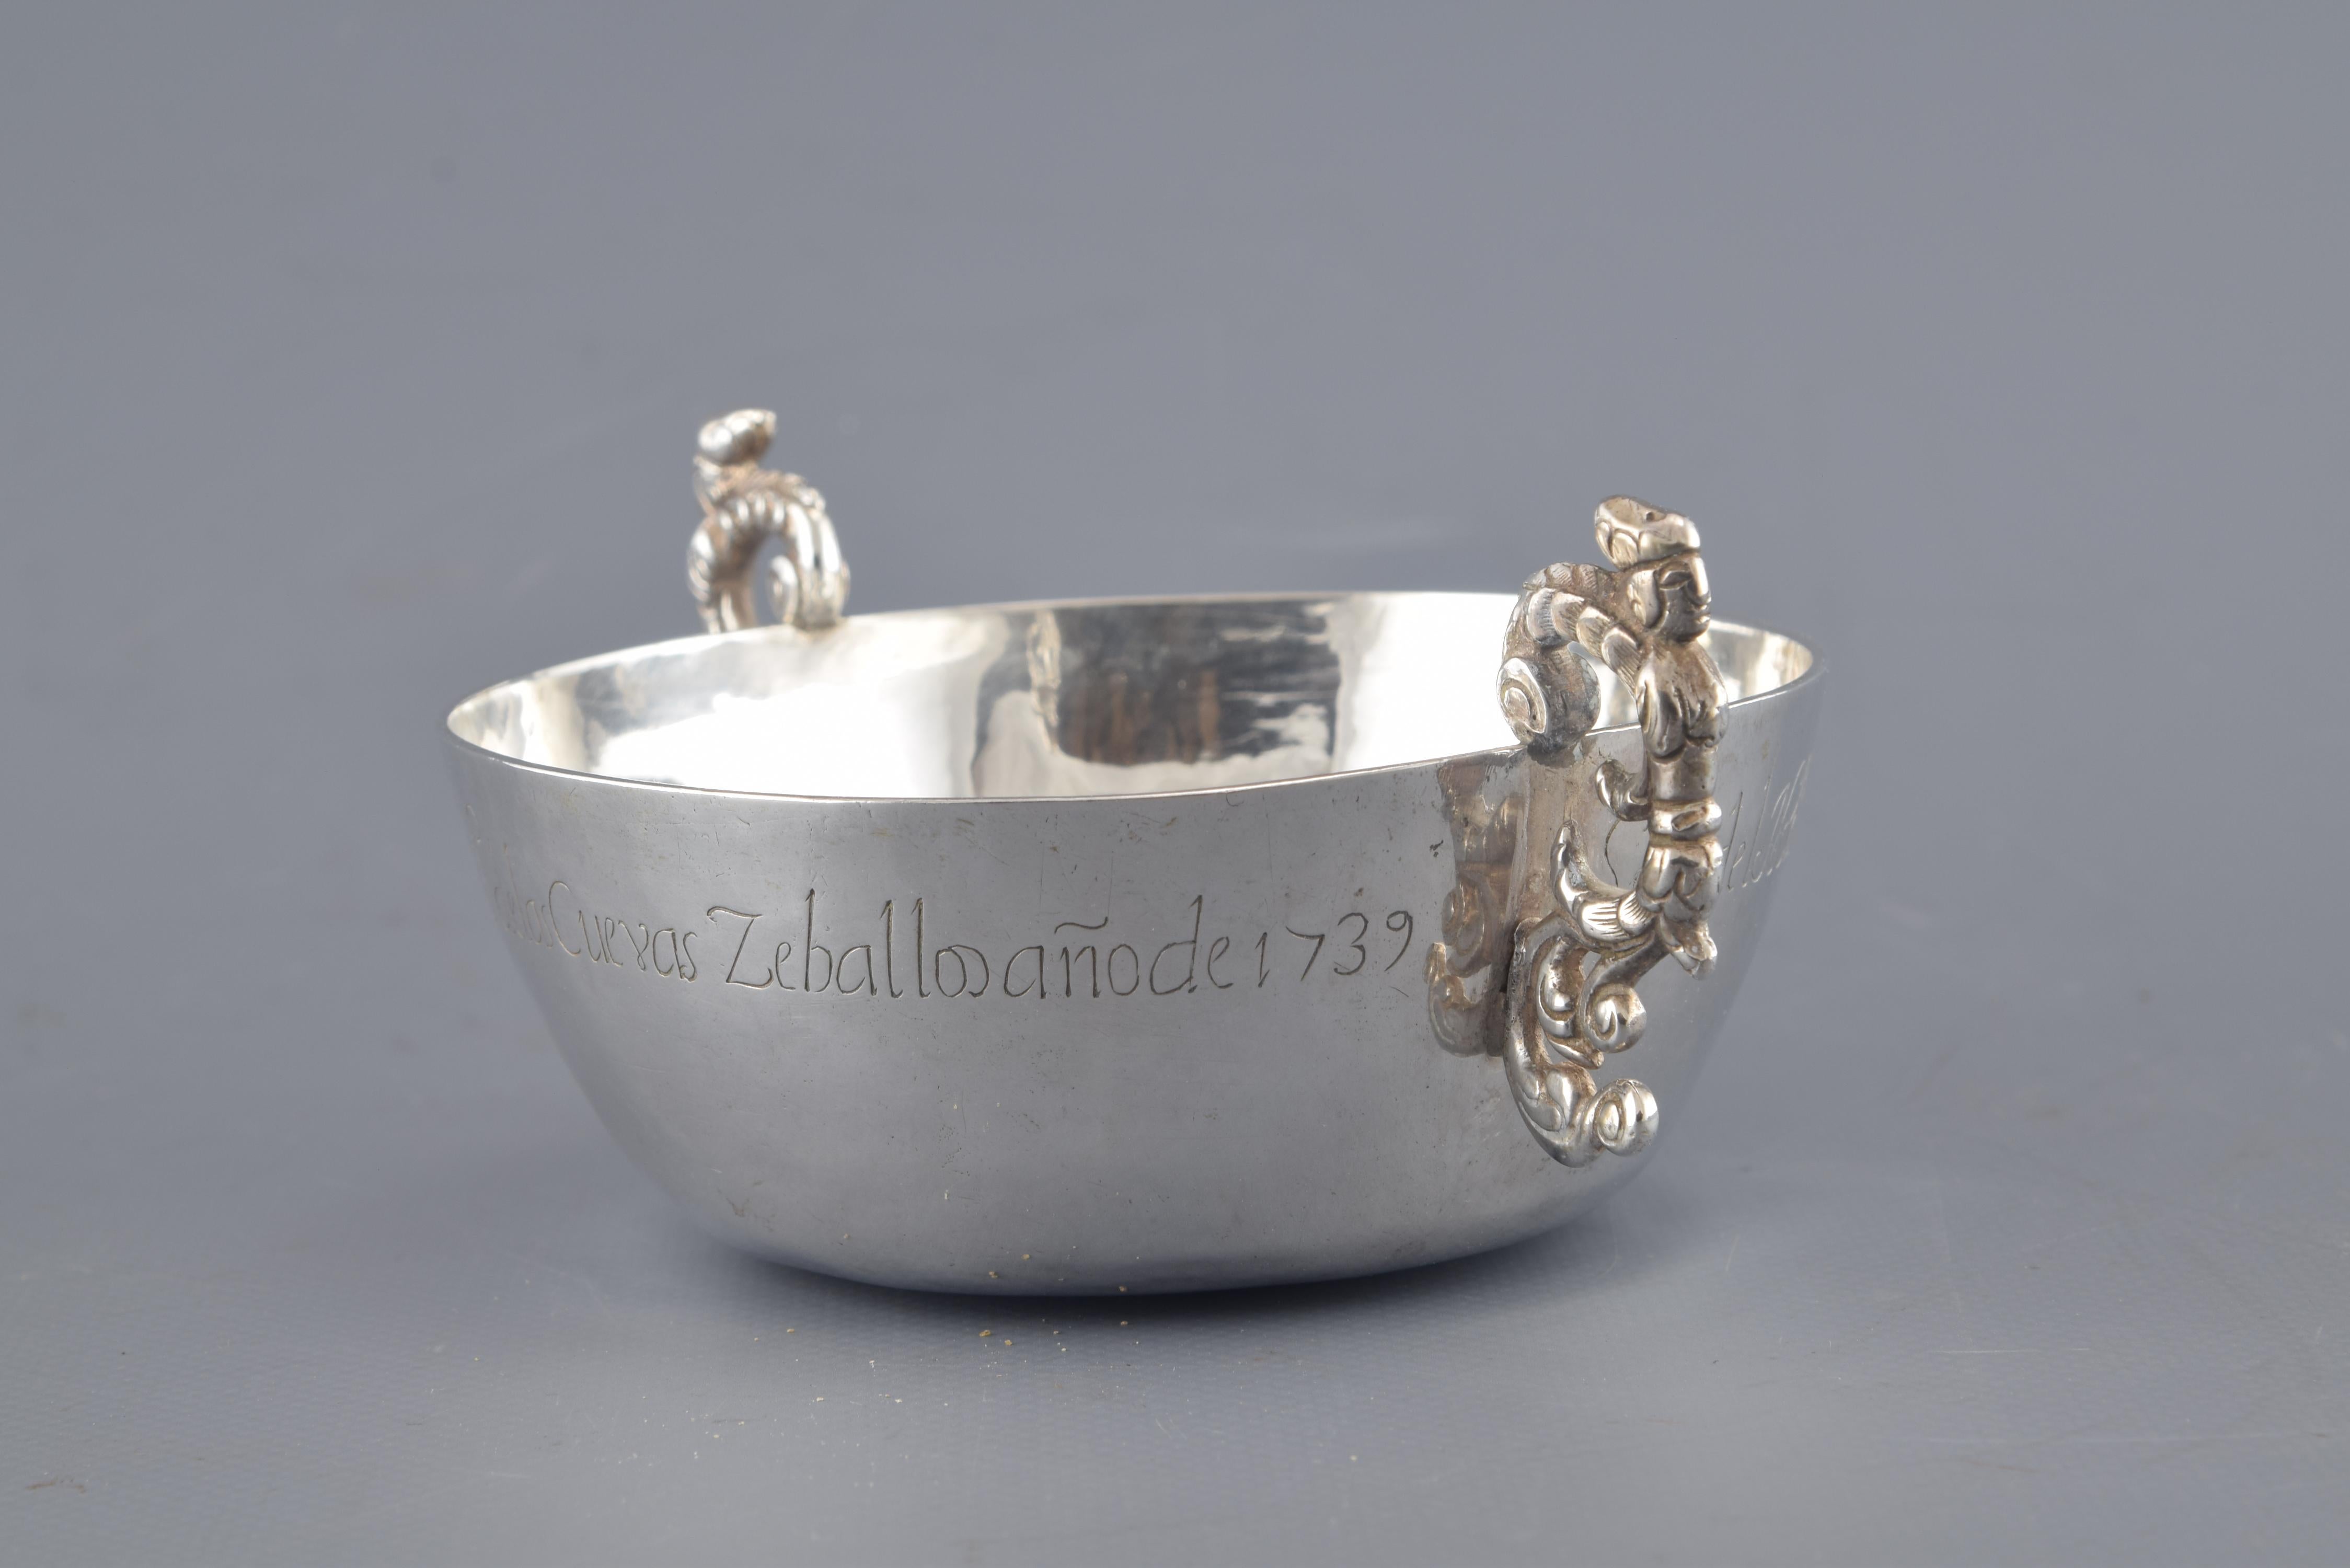 With inscription. Without hallmarks.
Circular “bowl” with smooth mouth and bottom of smaller diameter decorated with two handles (“S” shapped) and an inscription in the outer edge that reads: “Soy del noble conzefo de Santiux de que nos las